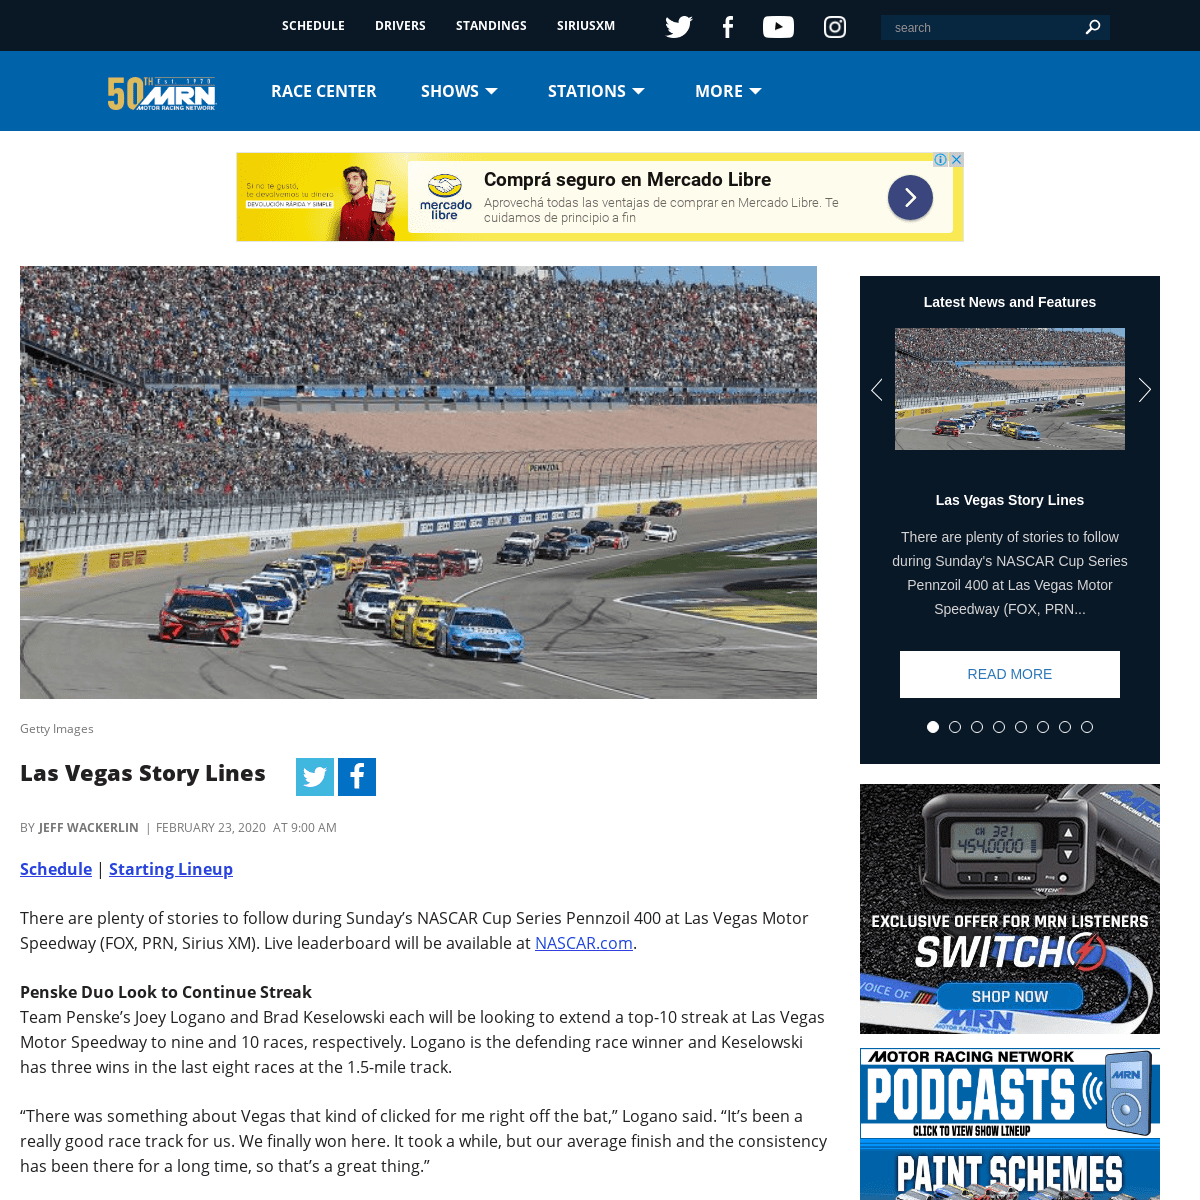 A complete backup of www.mrn.com/2020/02/23/las-vegas-story-lines-2020-pennzoil-400/